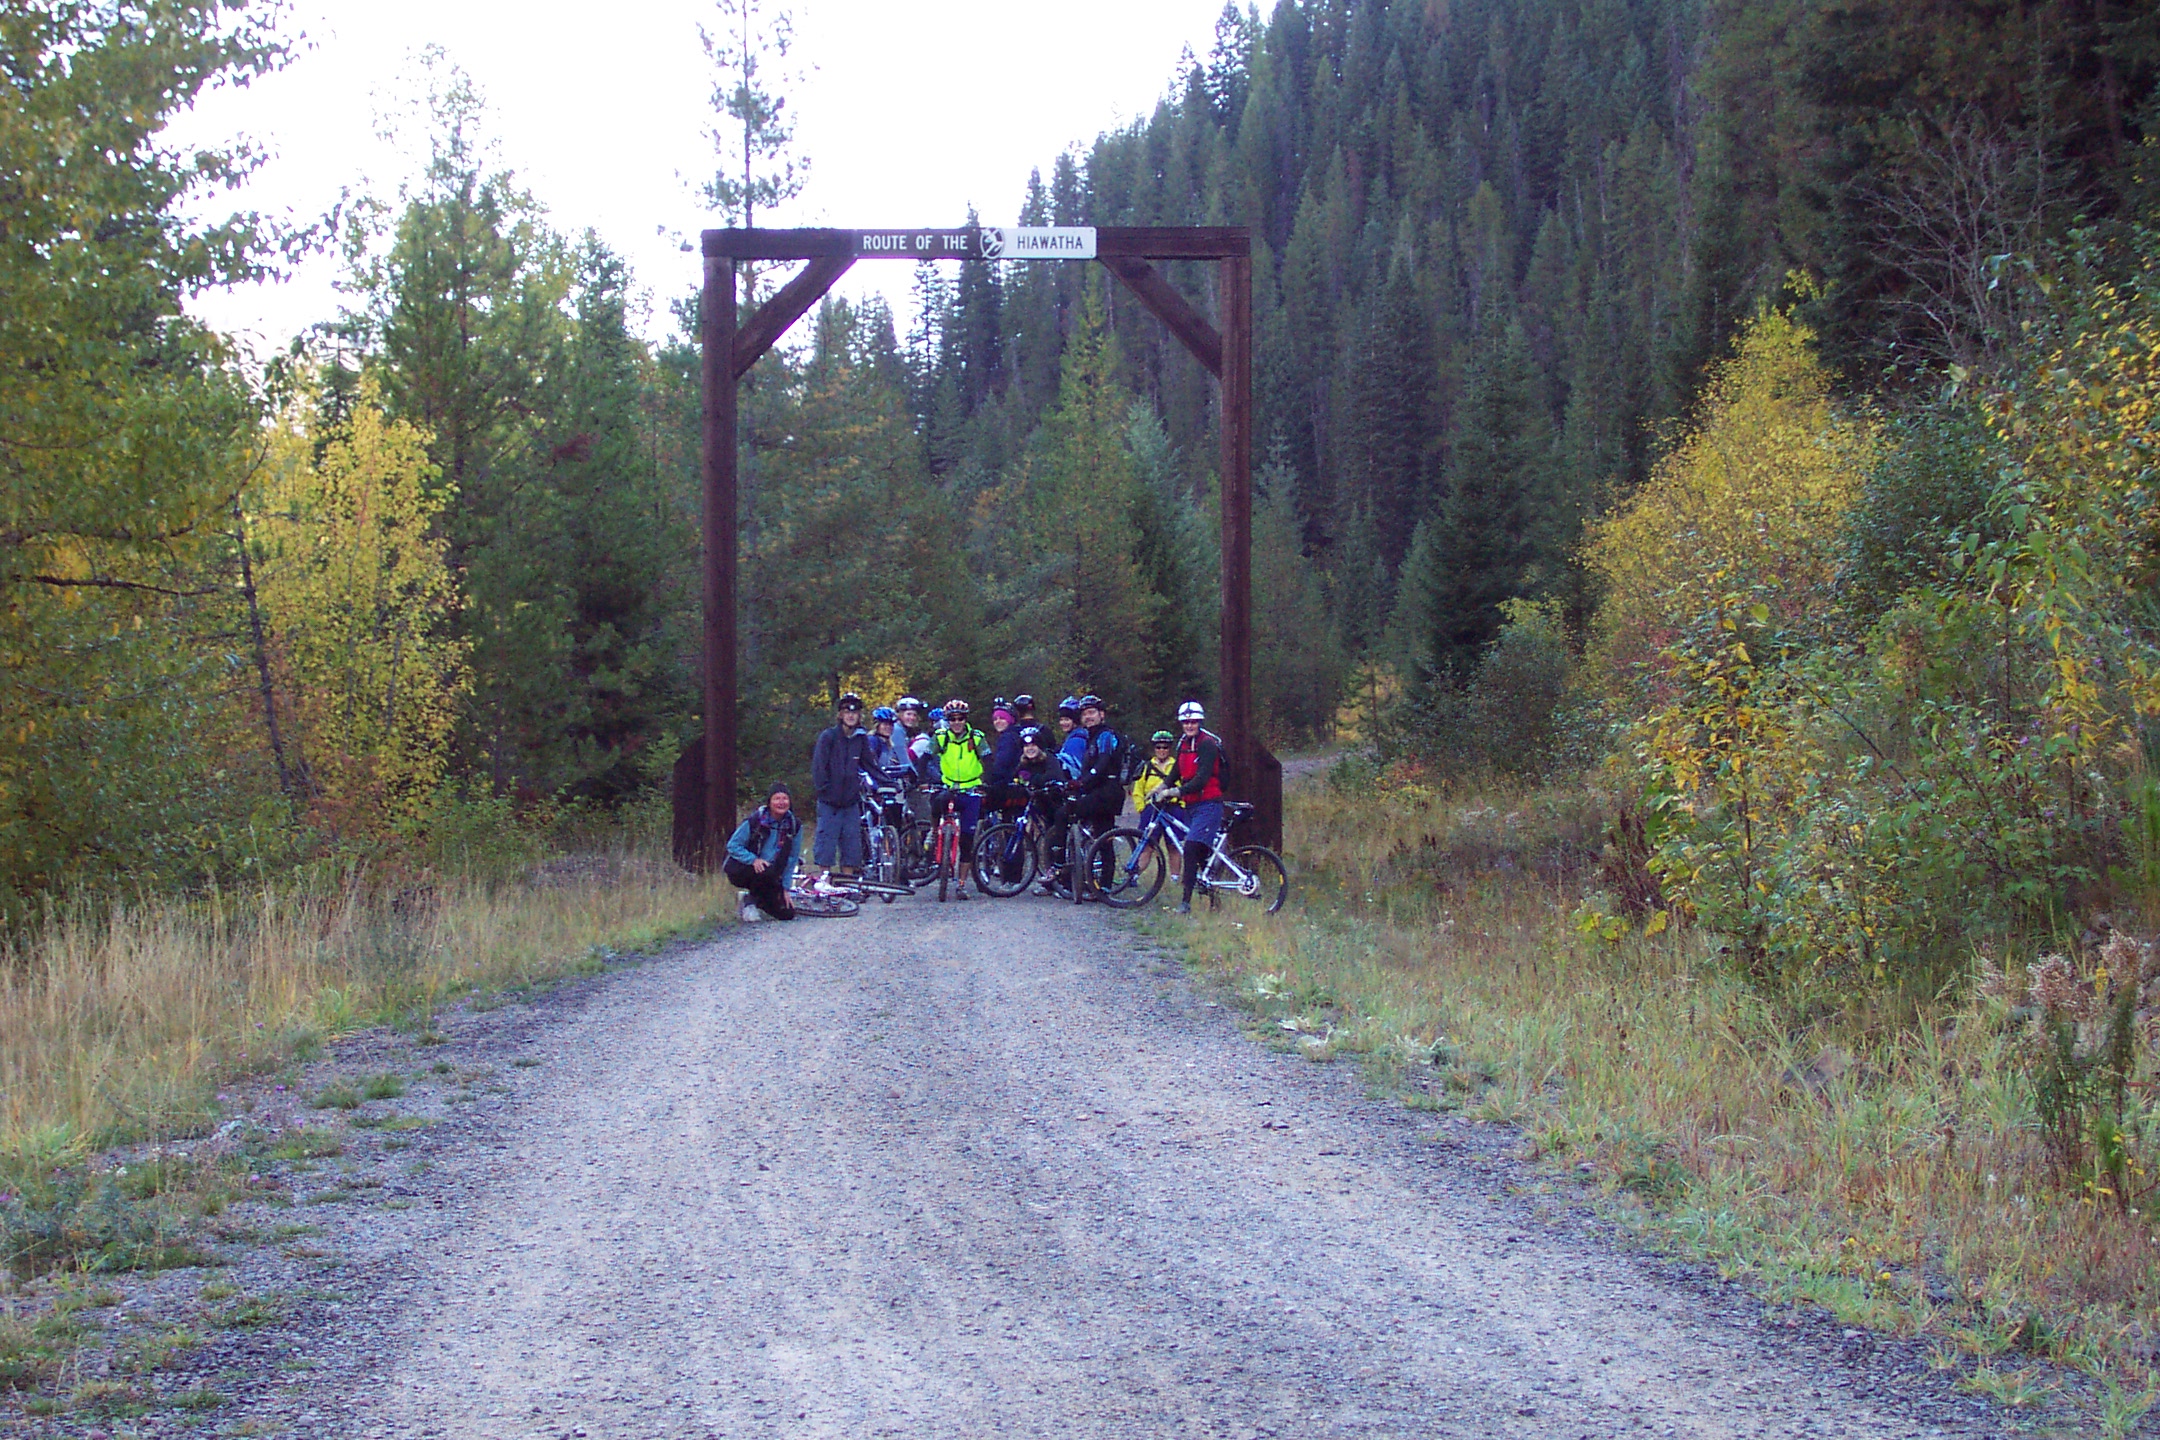 We rode the Hiawatha Bike Trail the last week-end in September.  It's an abandoned railroad bed on the Idaho/Montana border.